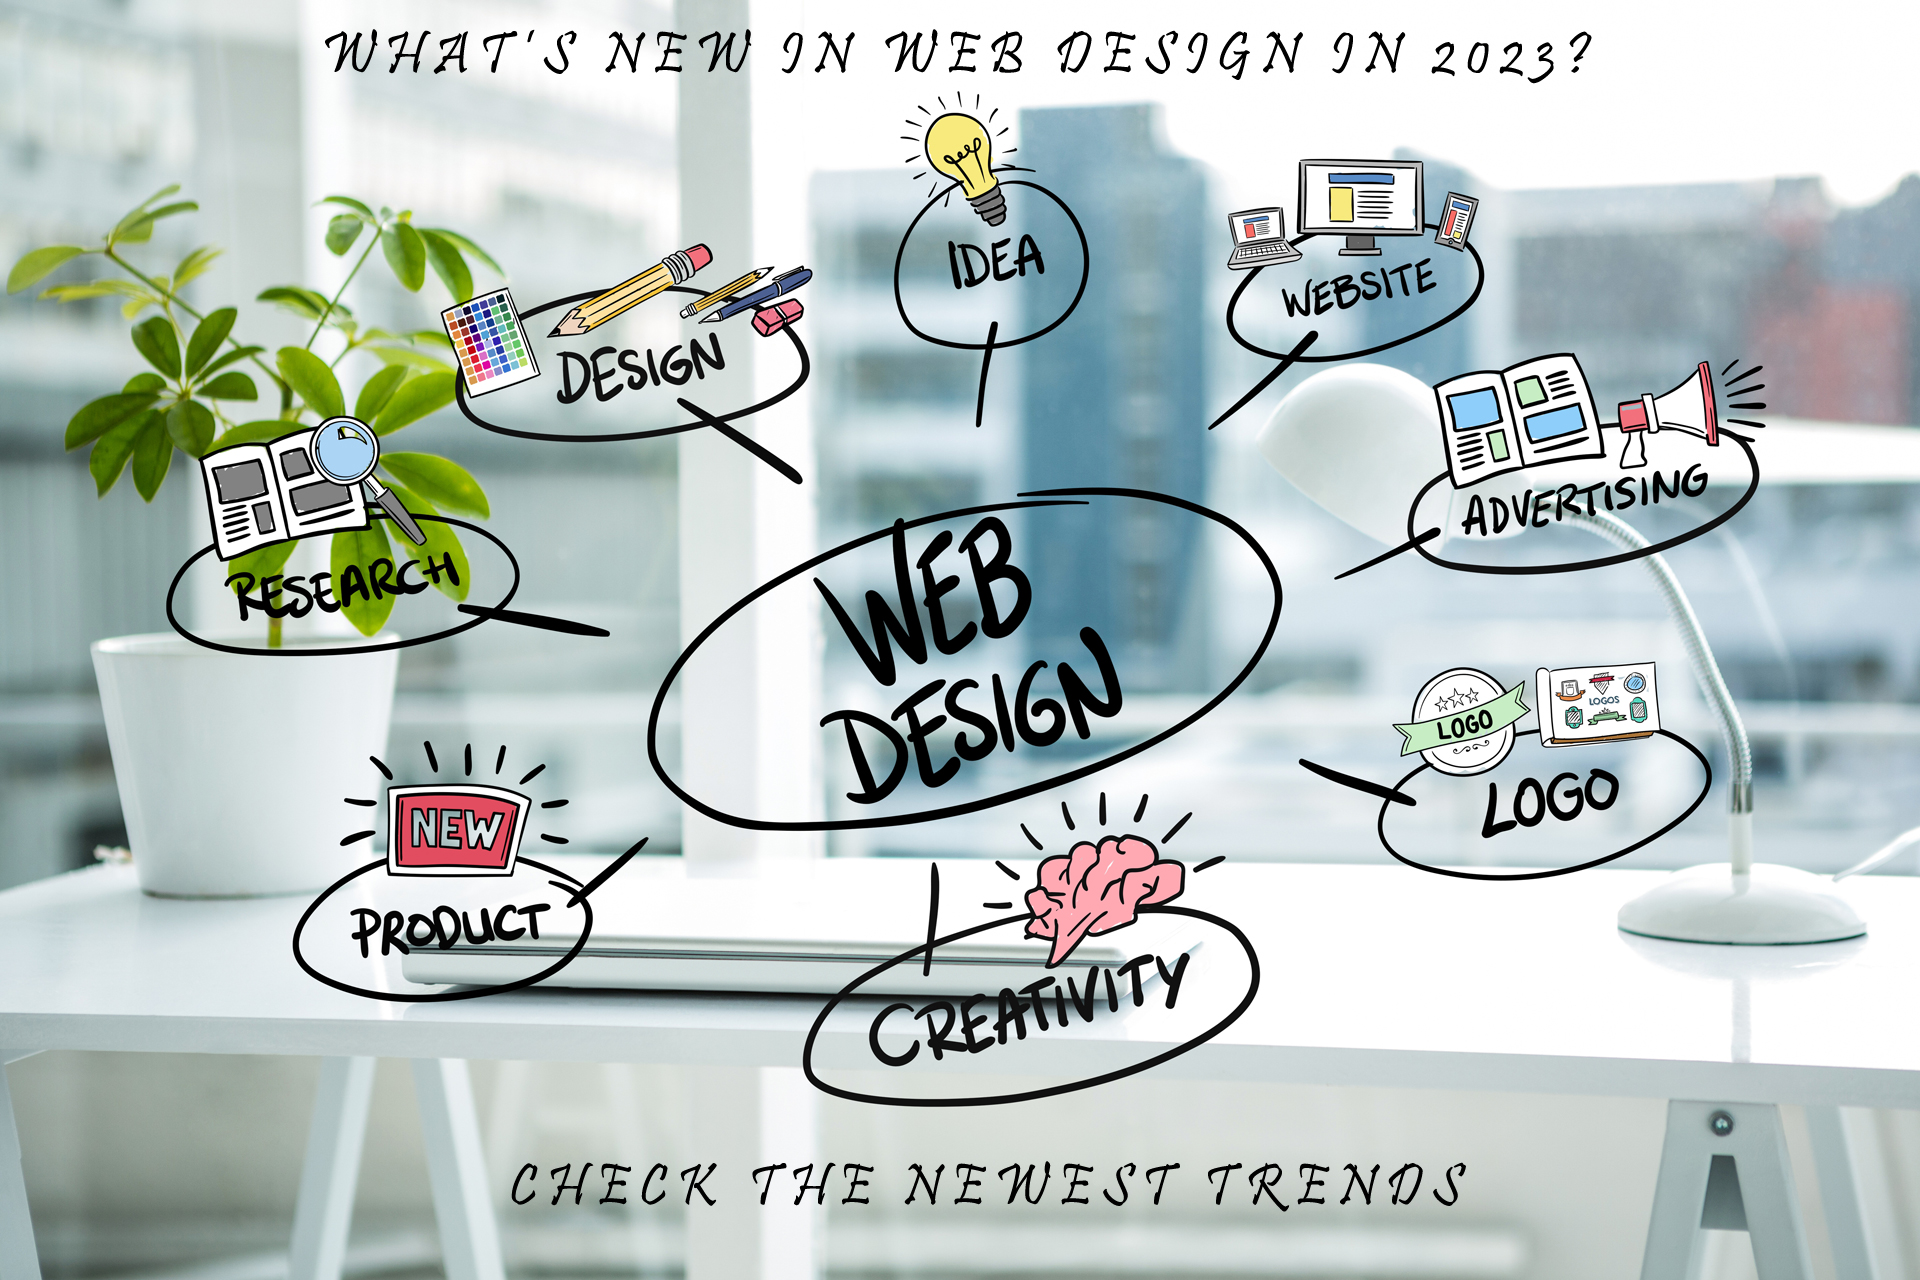 You are currently viewing Web design trends 2023 in Ireland